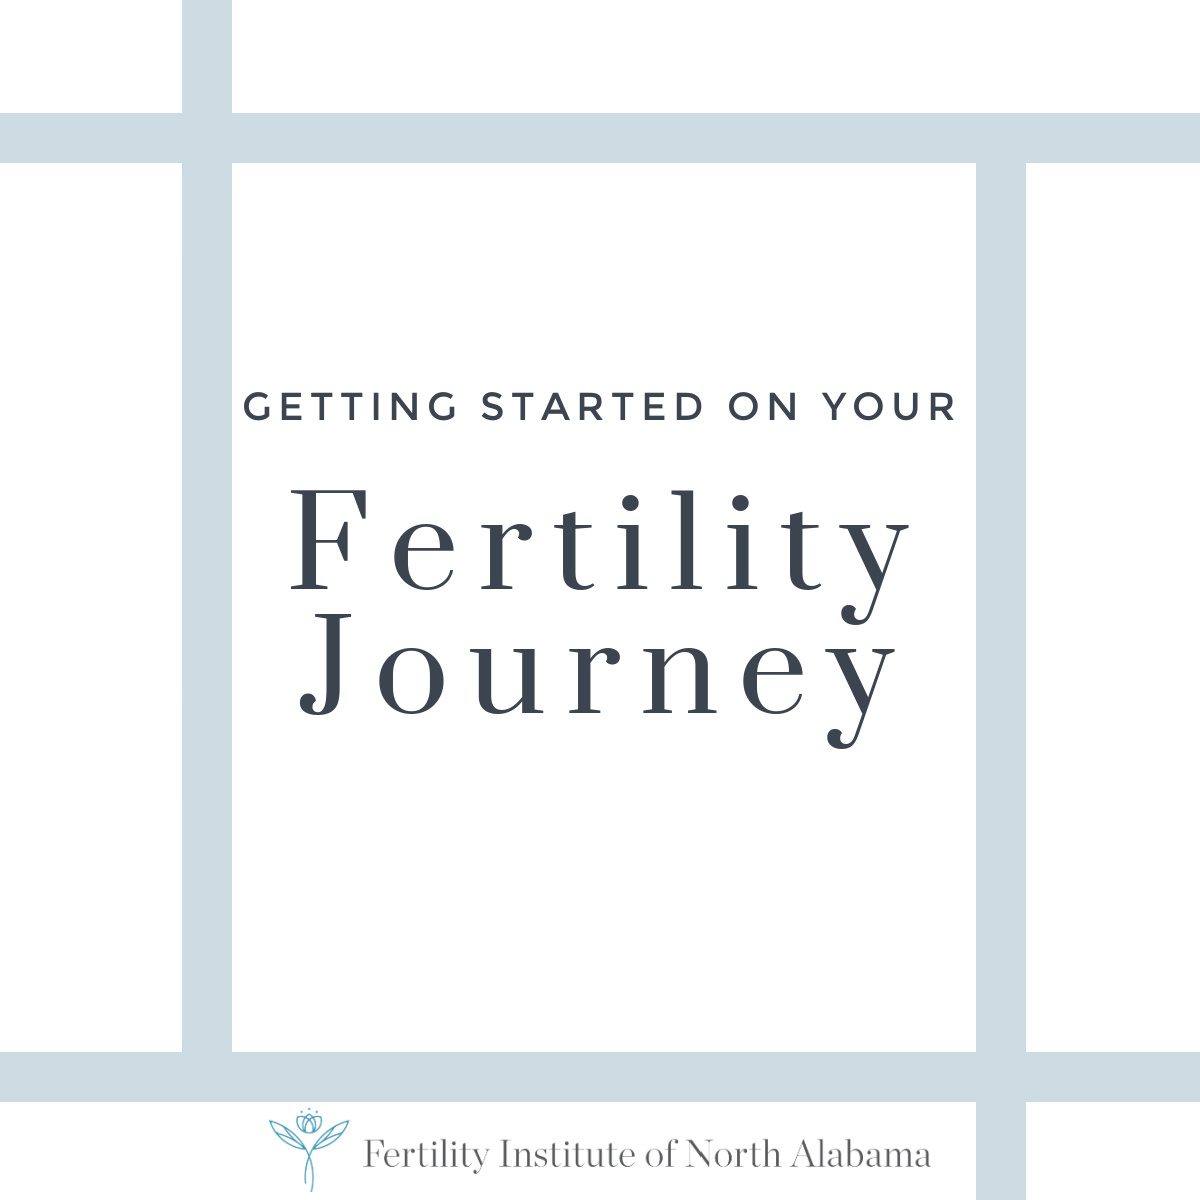 Getting Started on your Fertility Journey